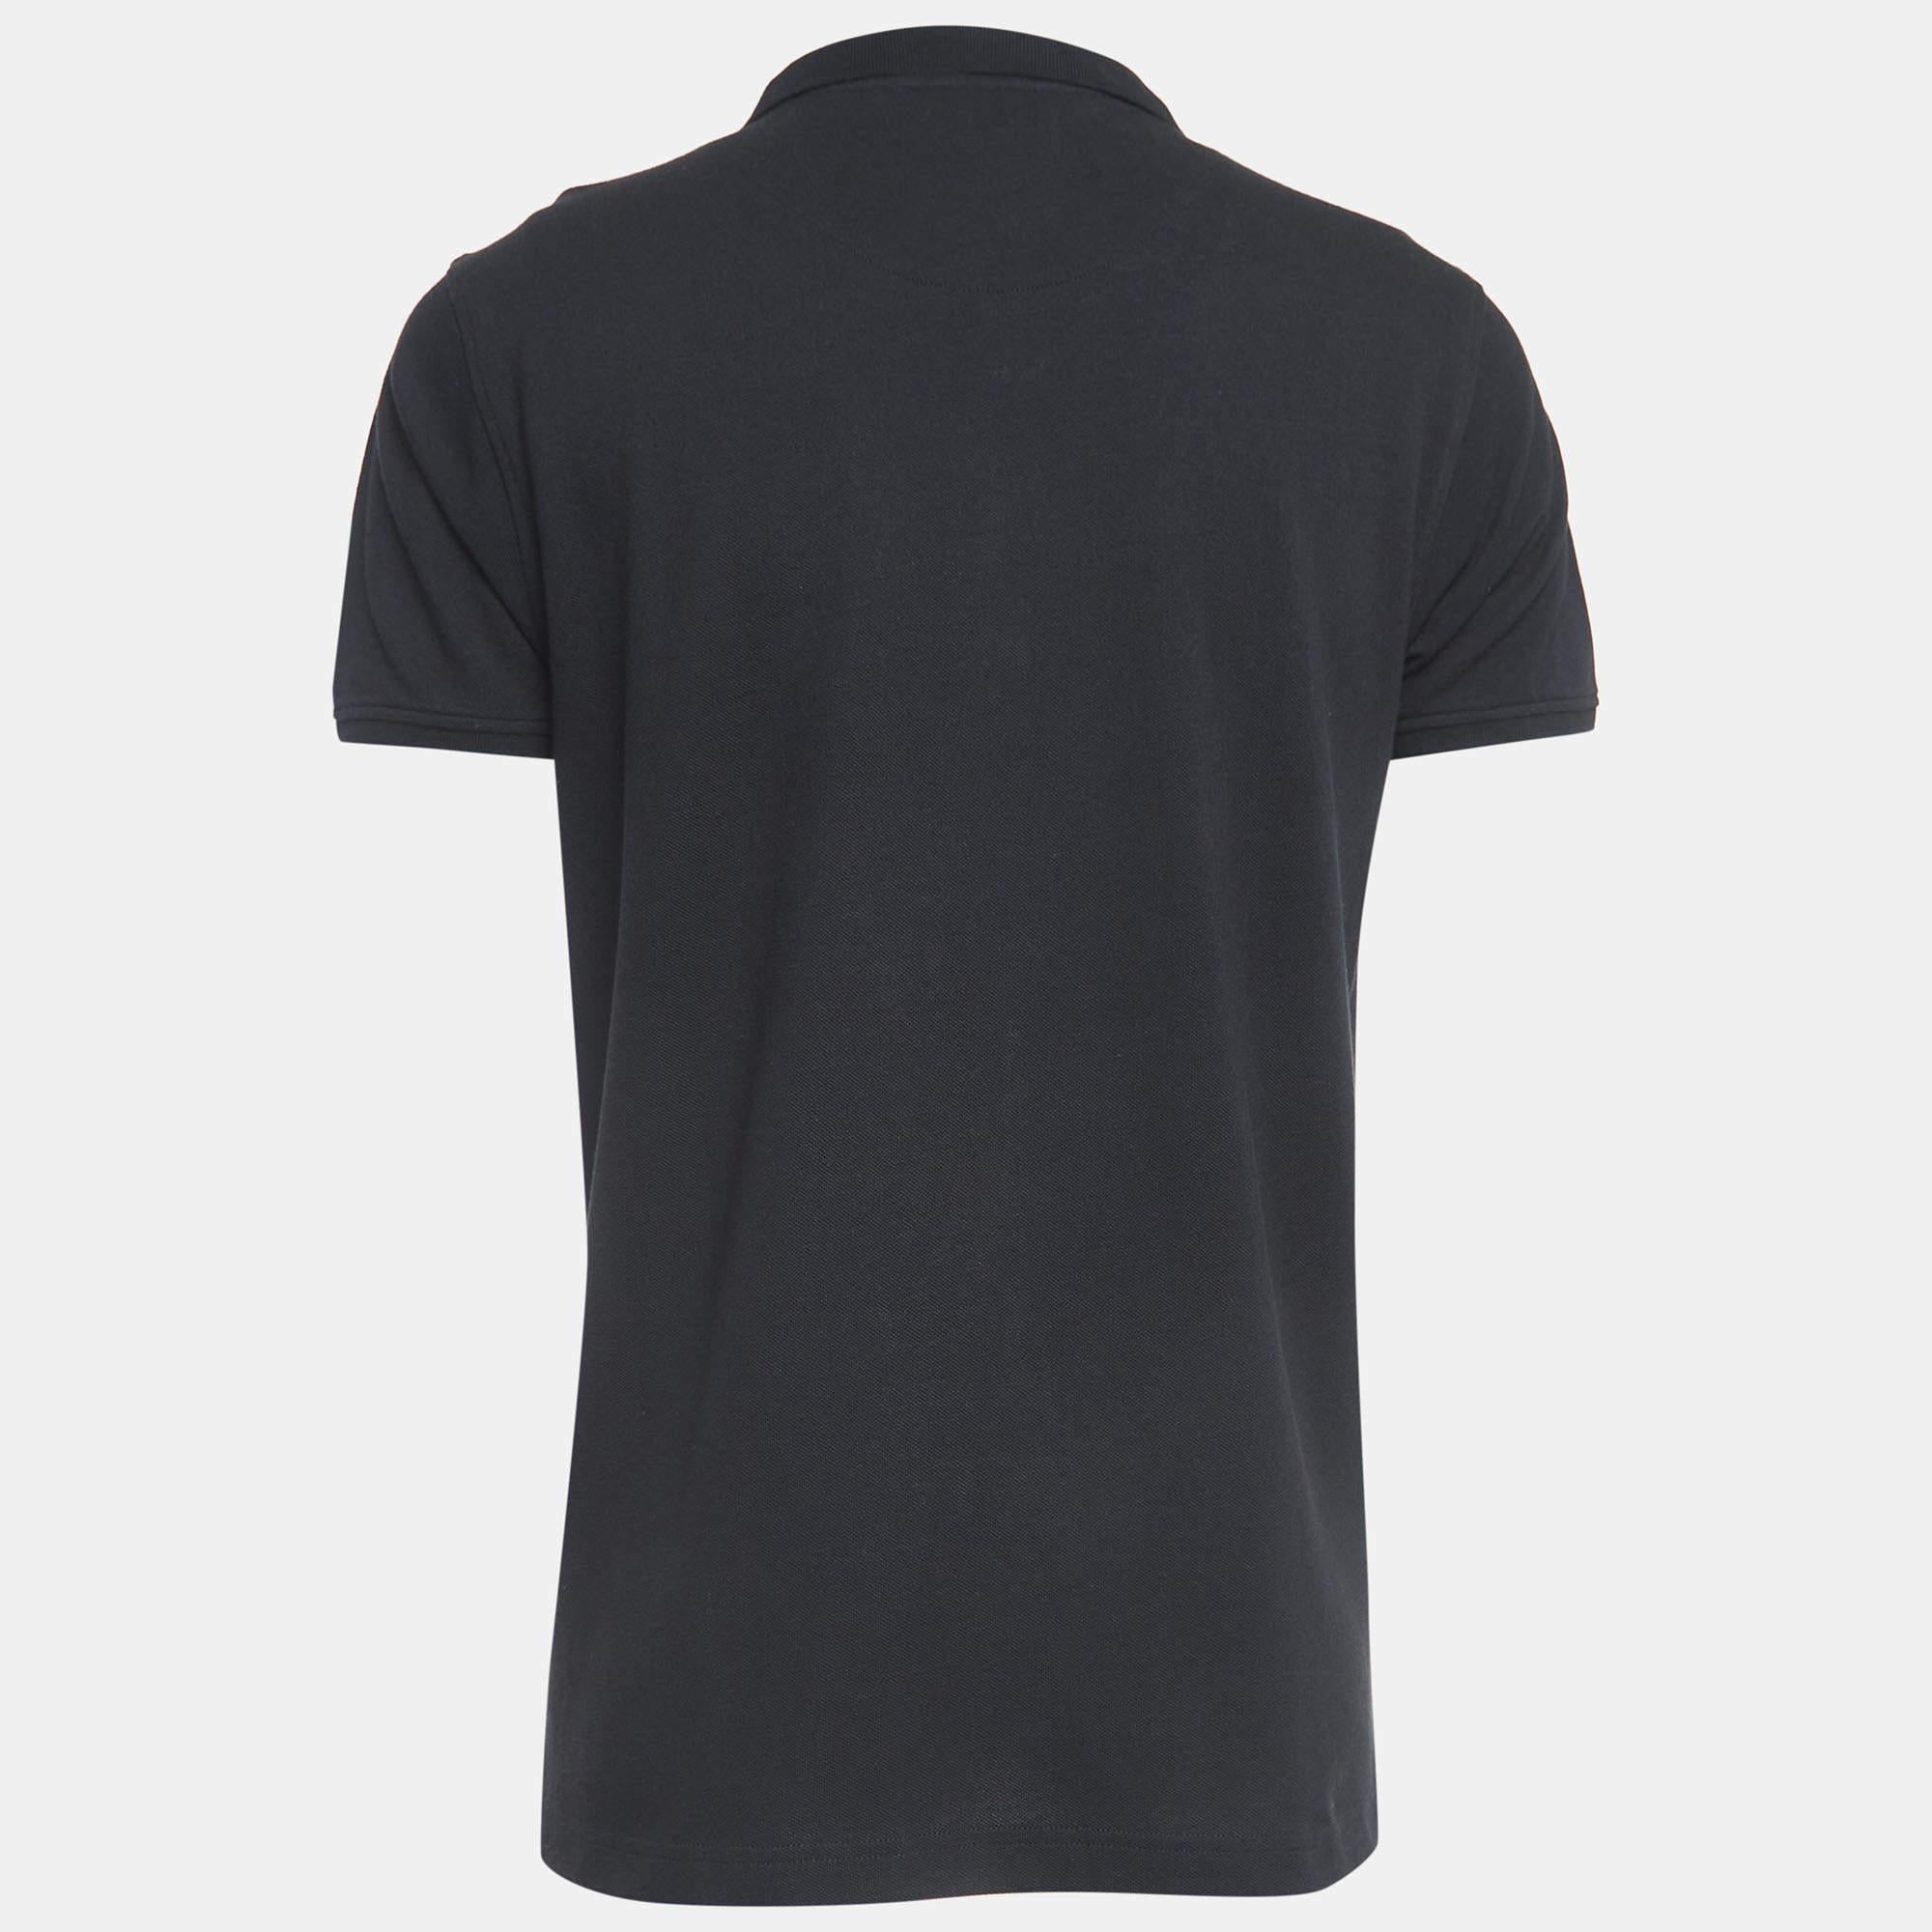 Get the comfort and the right casual style with this designer T-shirt. Designed to be reliable and durable, the creation has a simple neckline and signature detailing.

Includes: Brand Tag